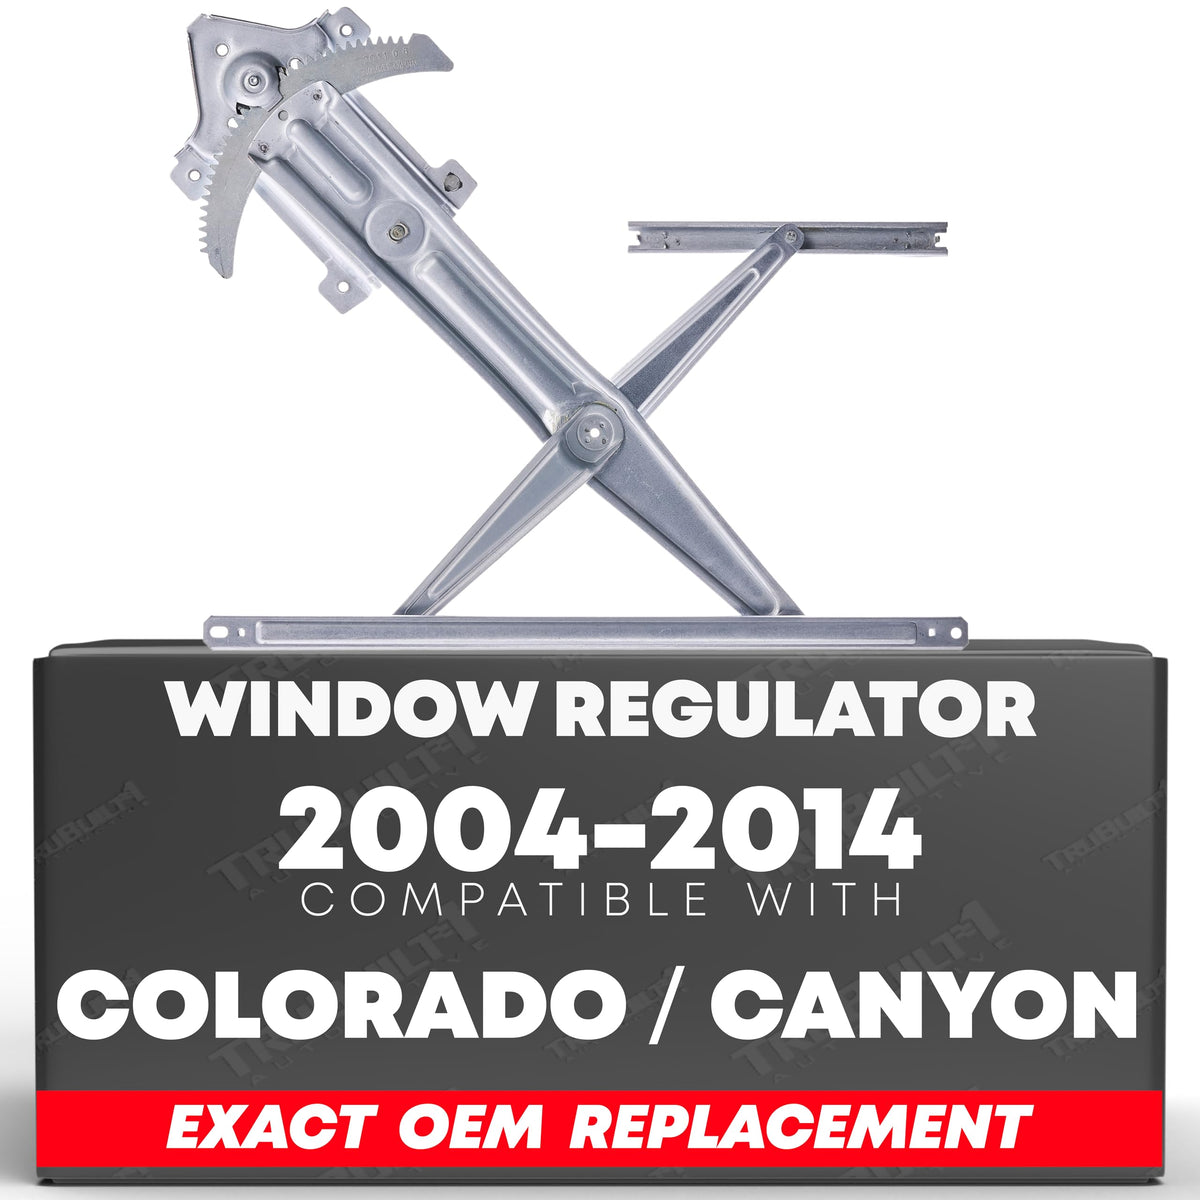 Window Regulator (Manual) Front Right Passenger Side | Compatible with 2004-2014 Chevy Colorado, GMC Canyon, Also 2006-2008 Isuzu | Replaces# 97247752, 749-261